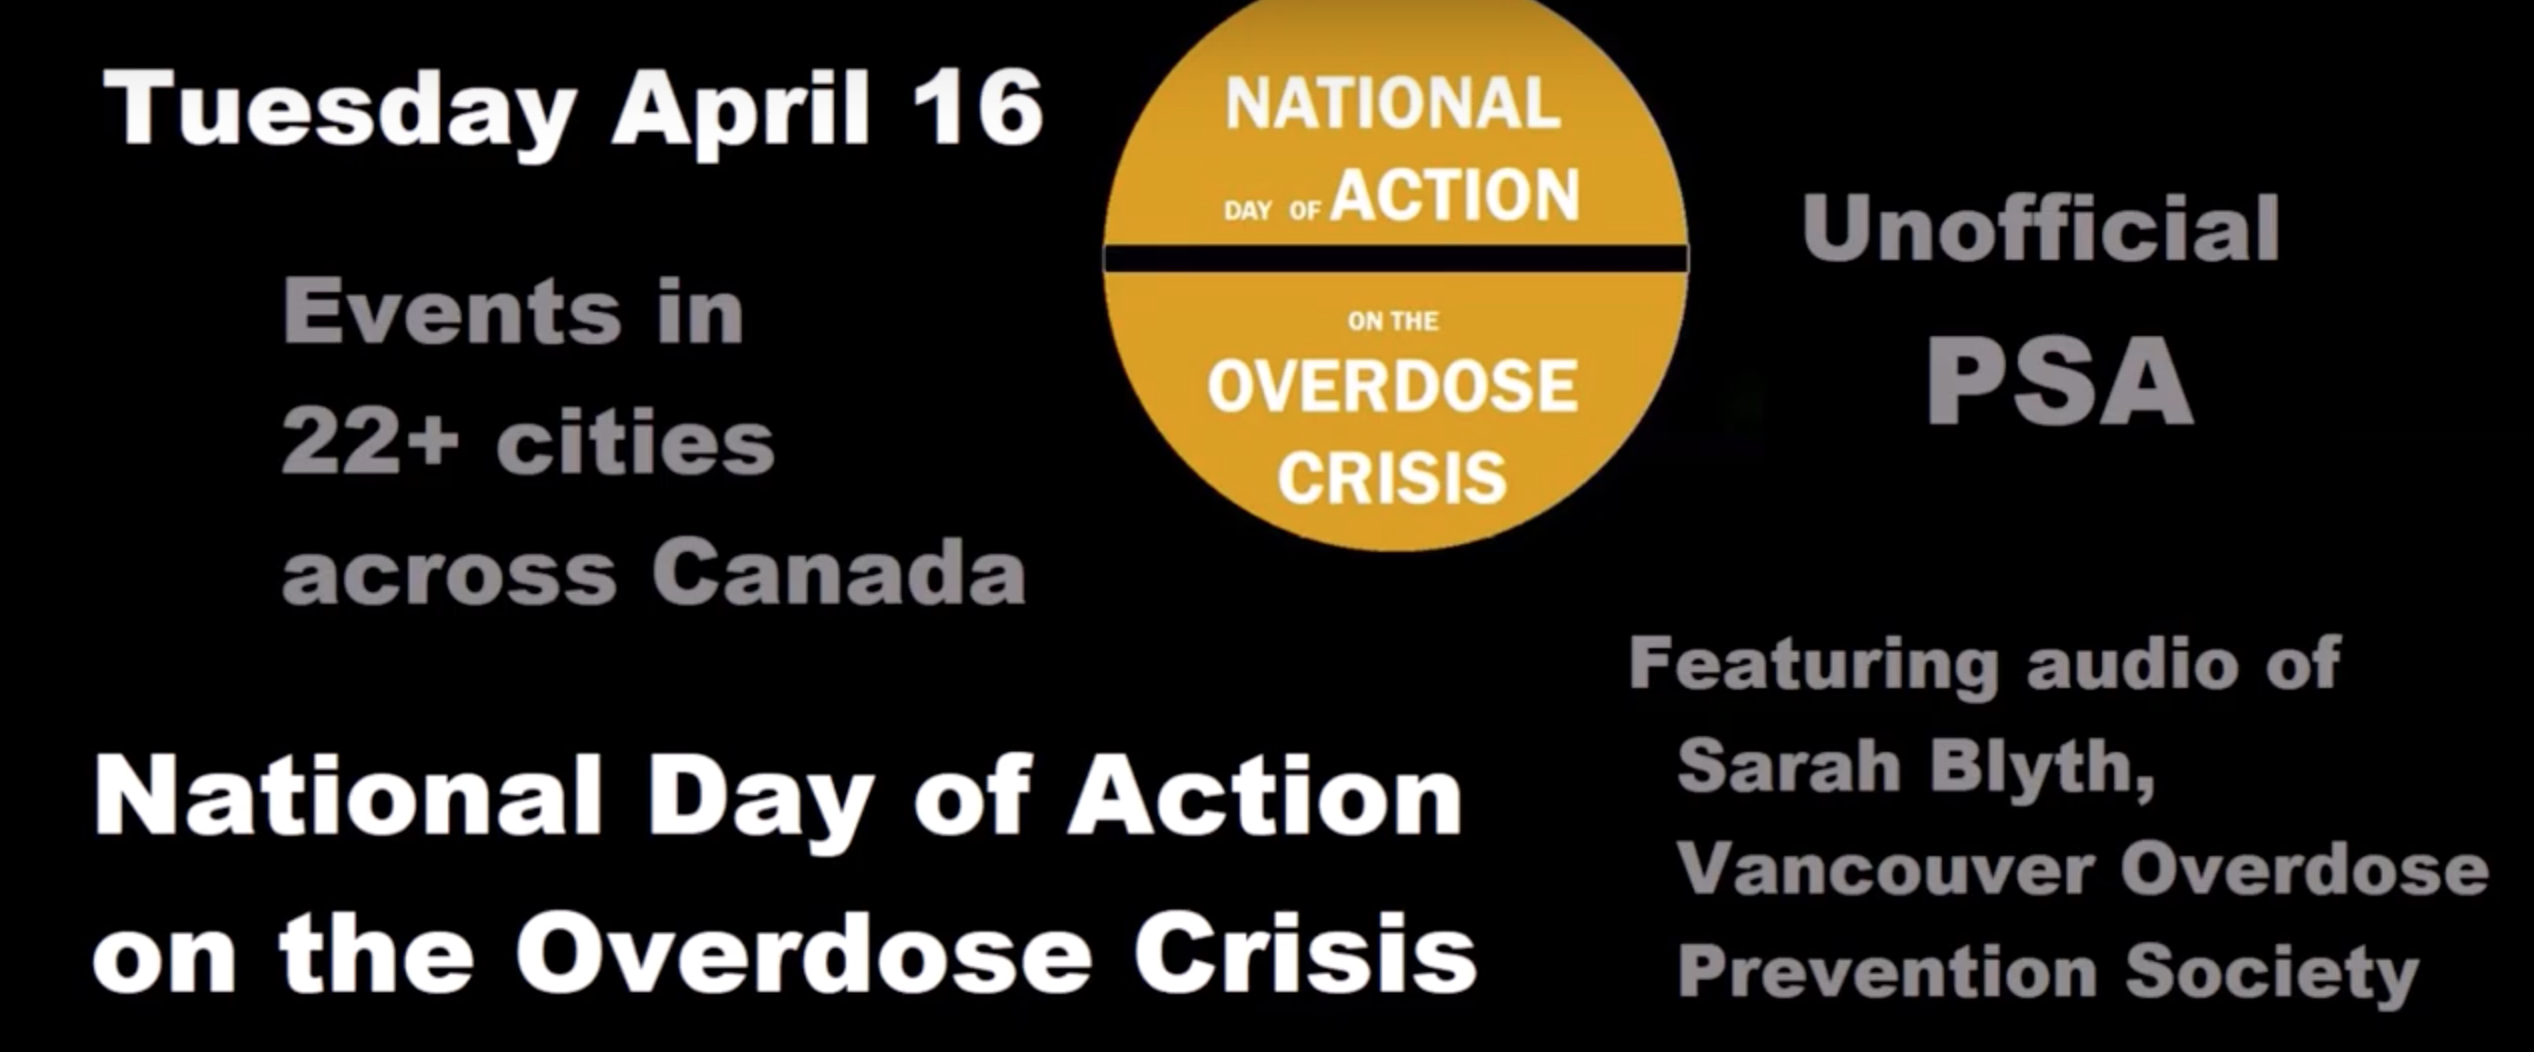 National Day of Action on the Overdose Crisis. Screenshot